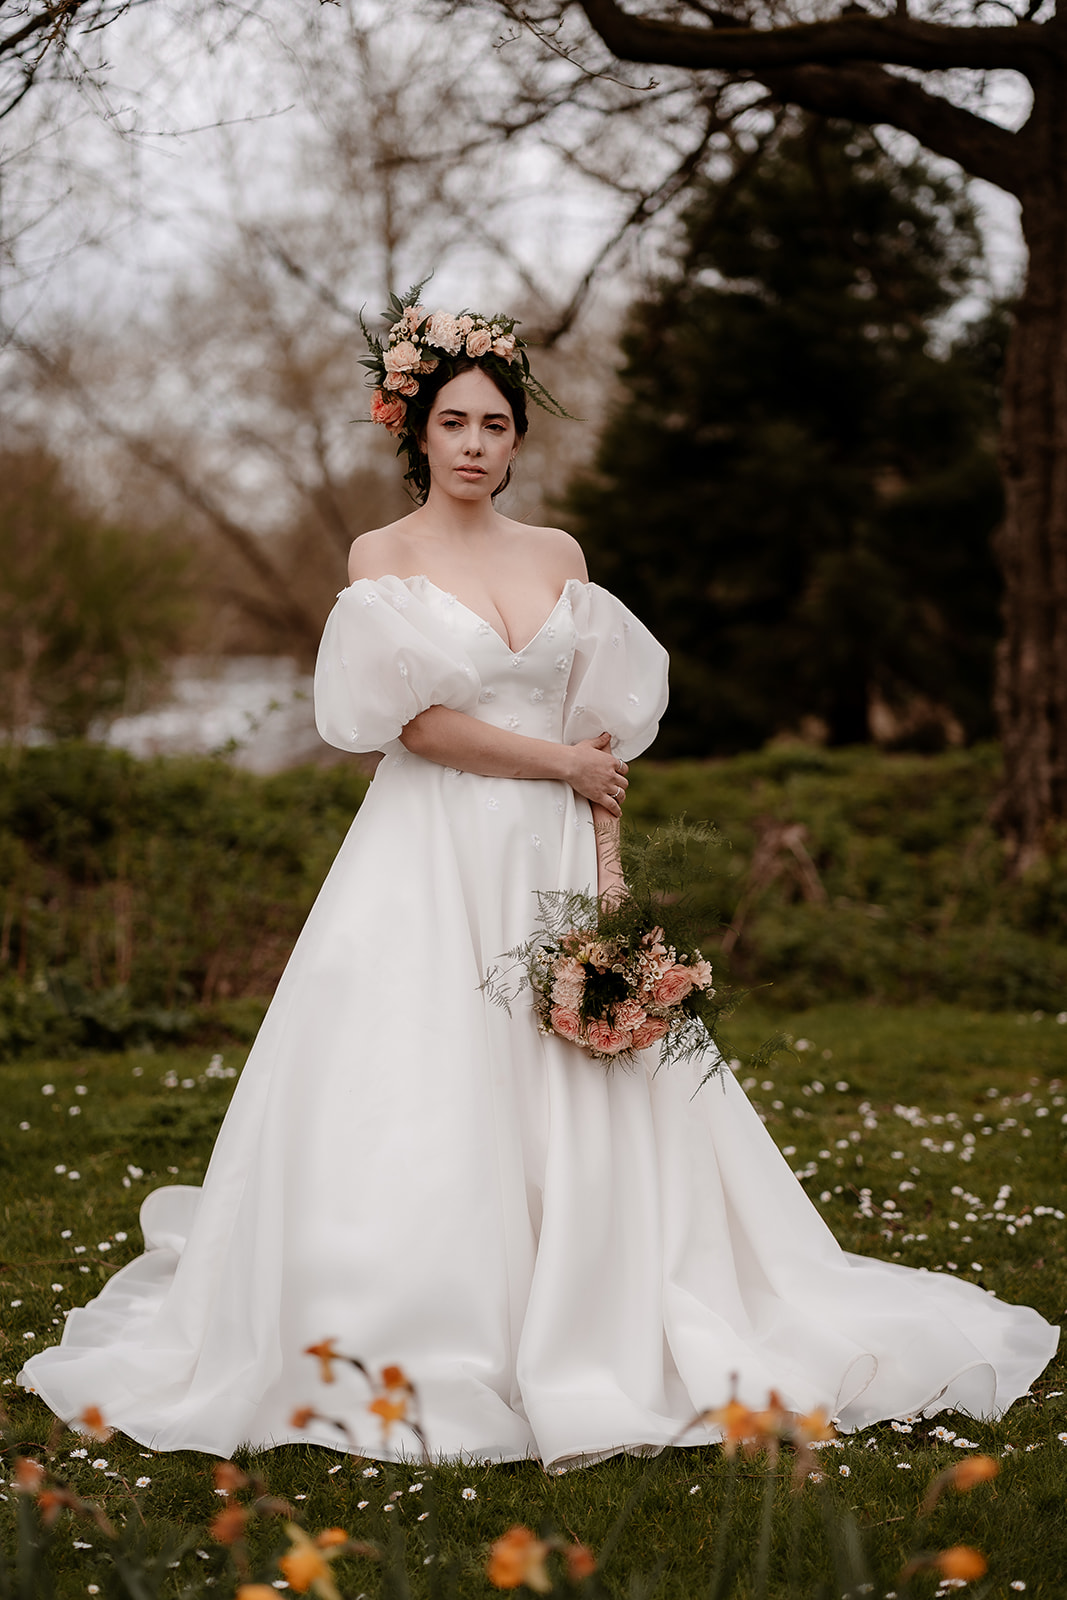 Bride wearing a flower crown and dress with puff sleeves stands among the daffodils at Mapledhurham House